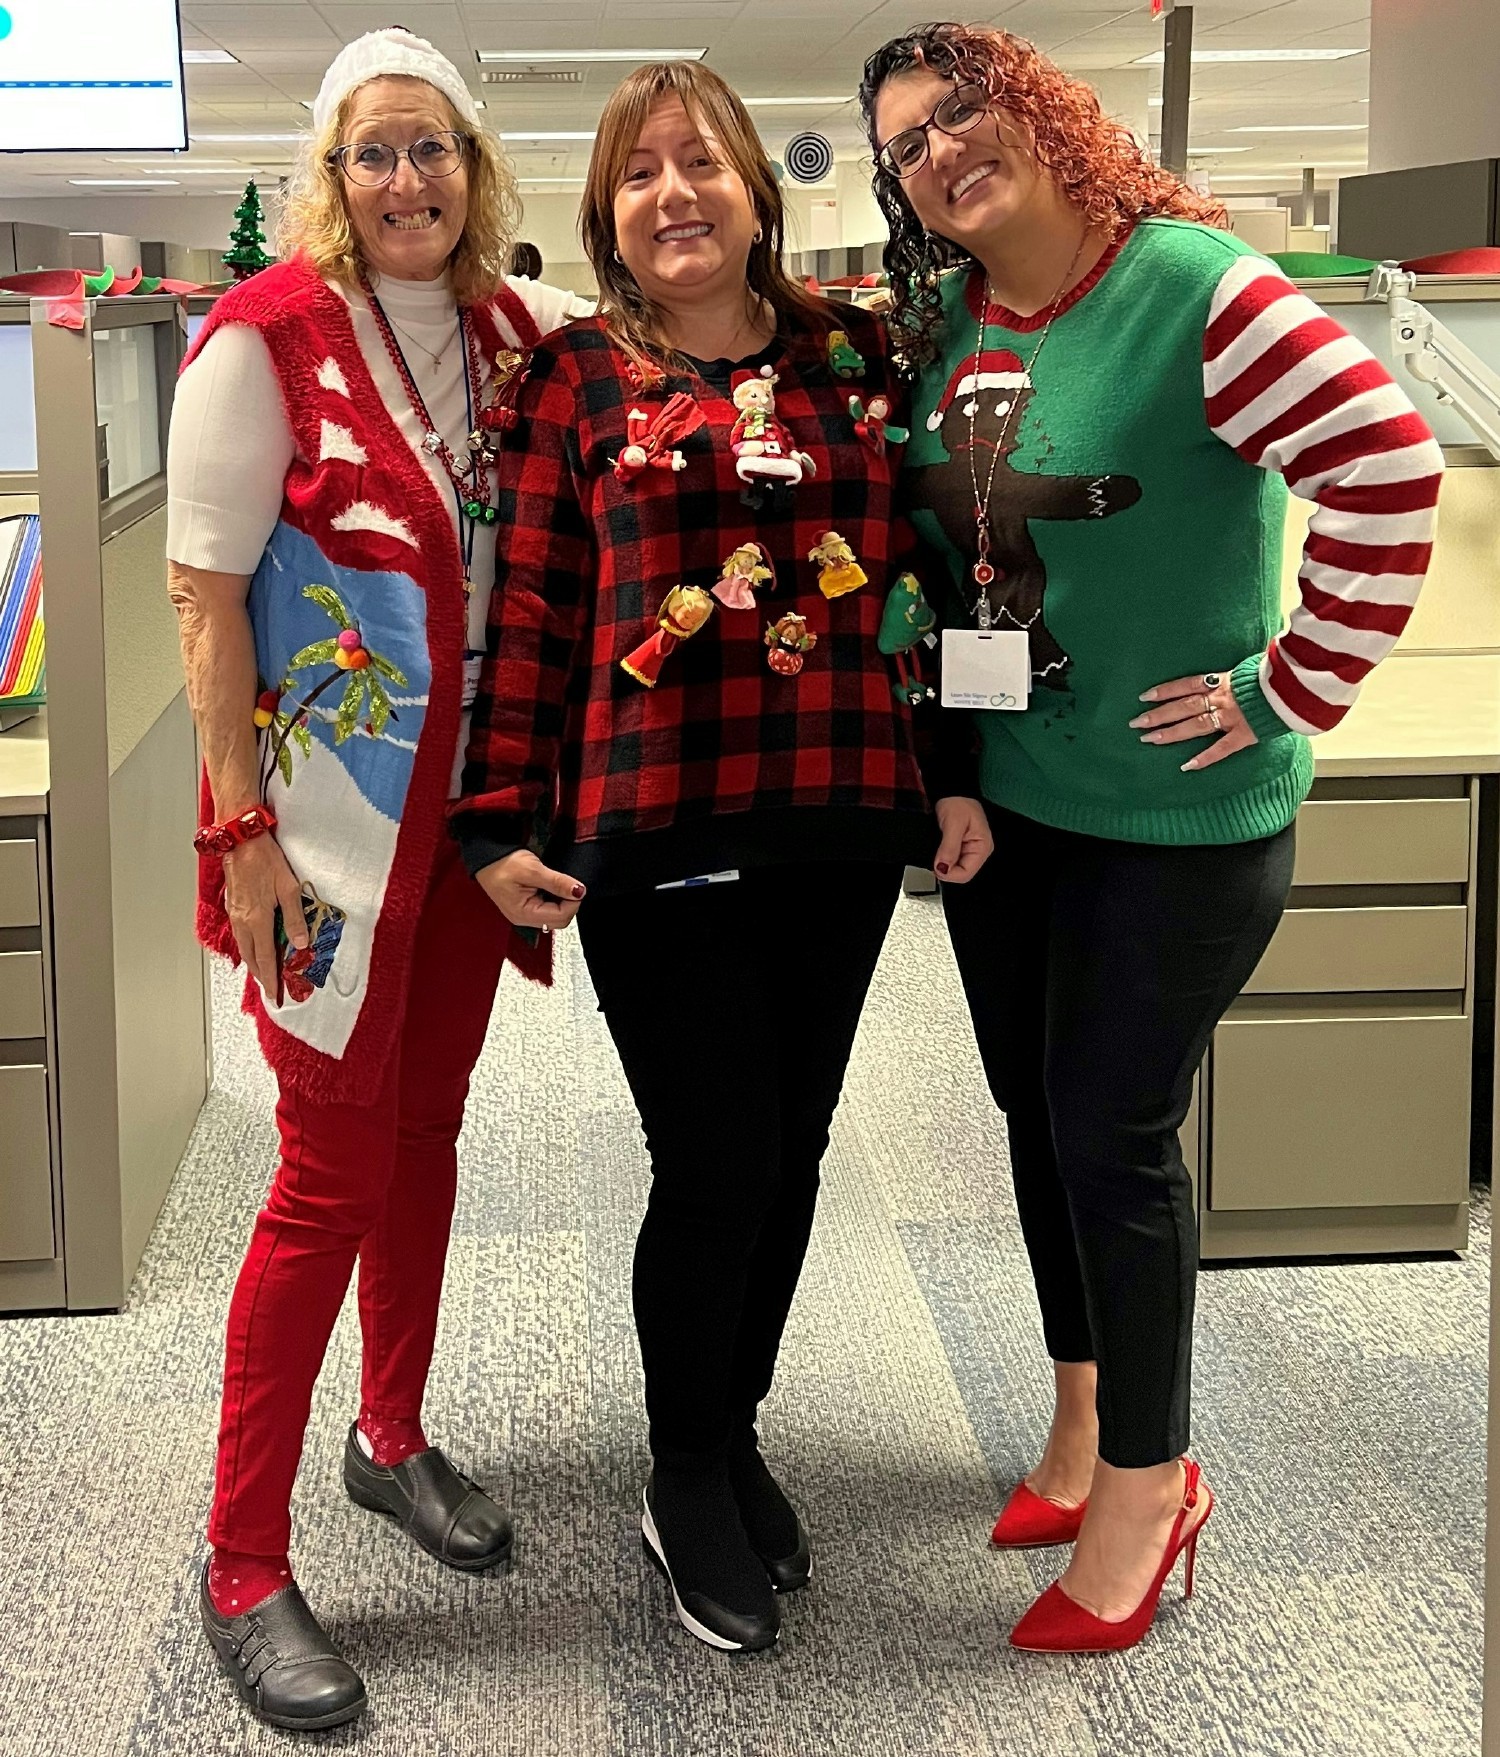 Whether it's showing off holiday sweaters or decorating offices and cubicles, Community Care Plan loves holidays!